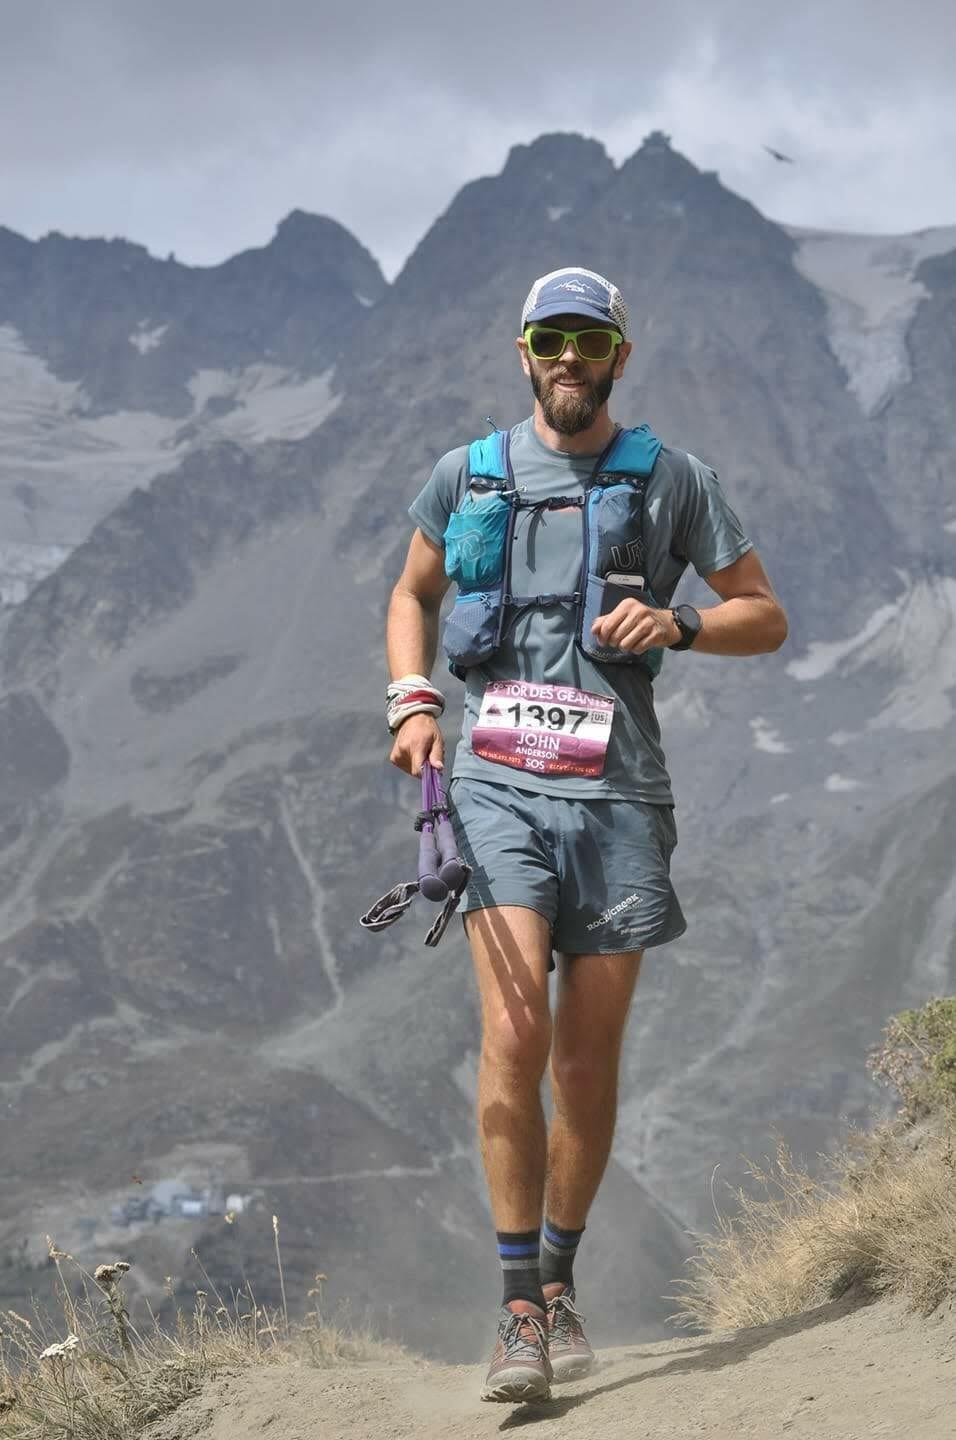 Trailrunner with grey shorts and shirt and 2 poles in his right hand